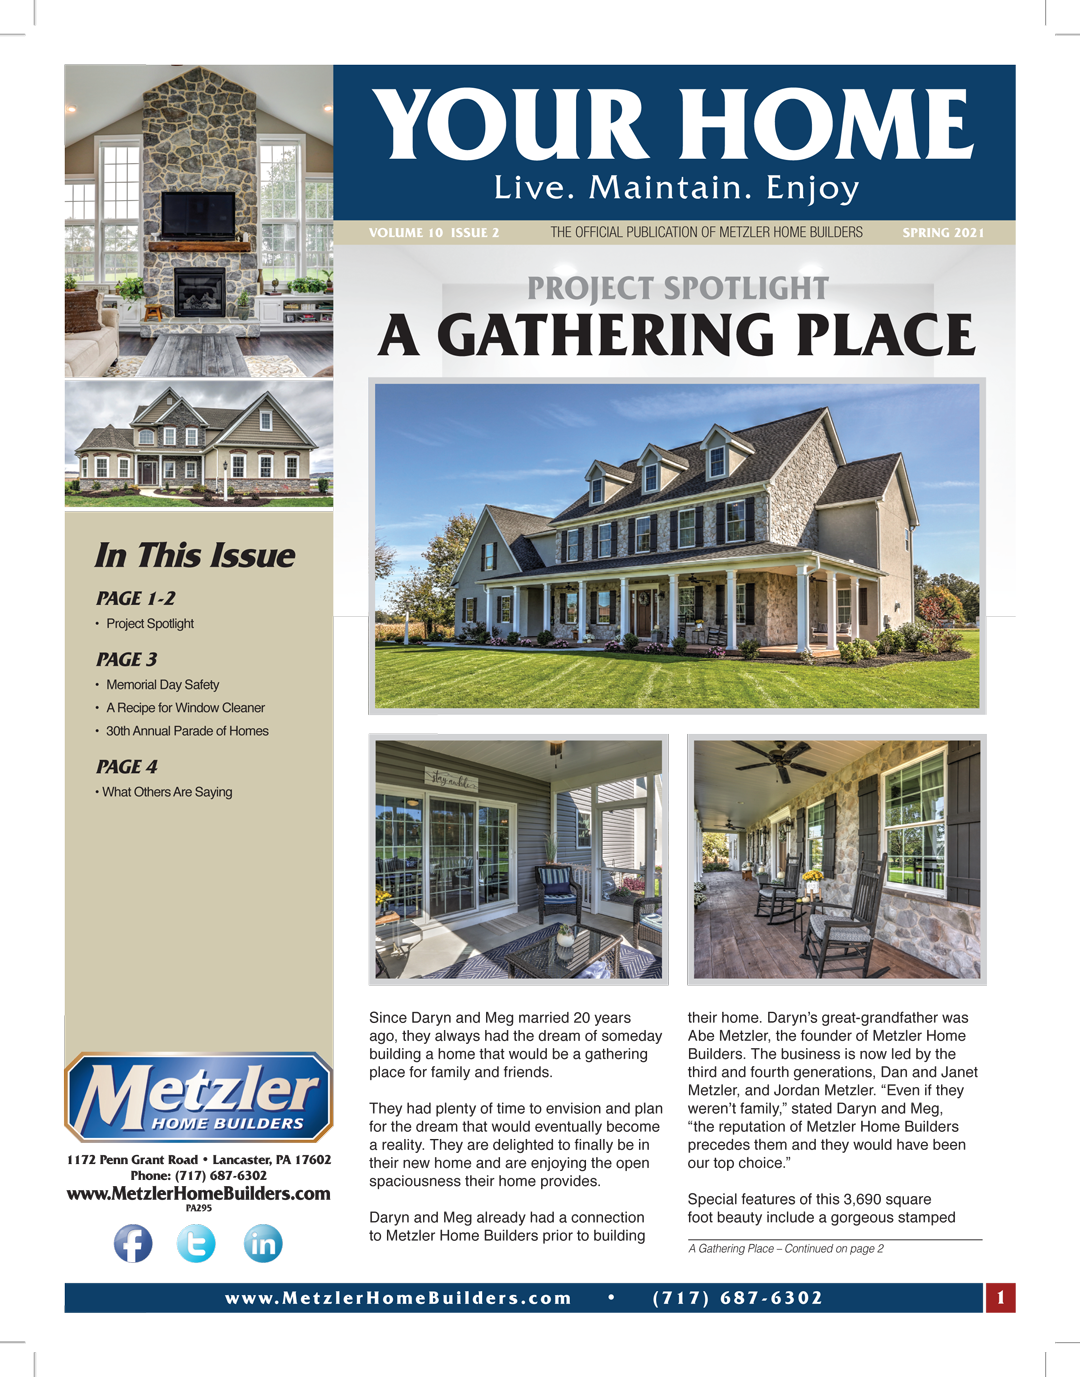 Metzler 'Your Home' Newsletter PDF cover for Spring 2021